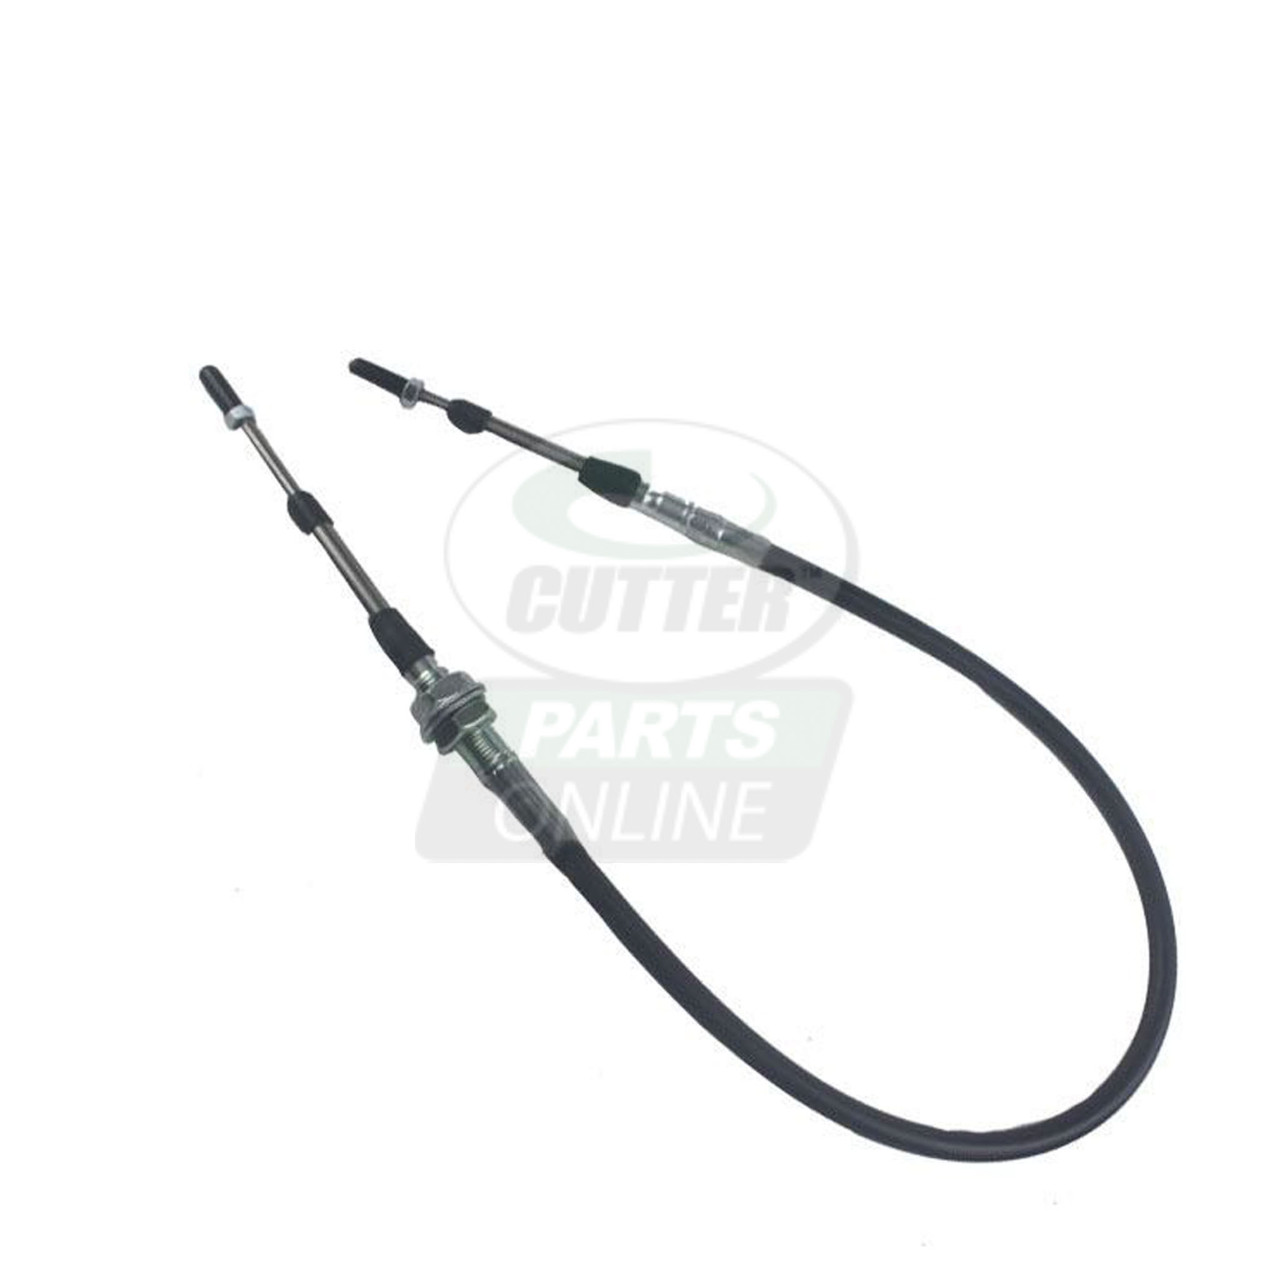 New Traction Cable Assembly - Replaces Toro 107-2084